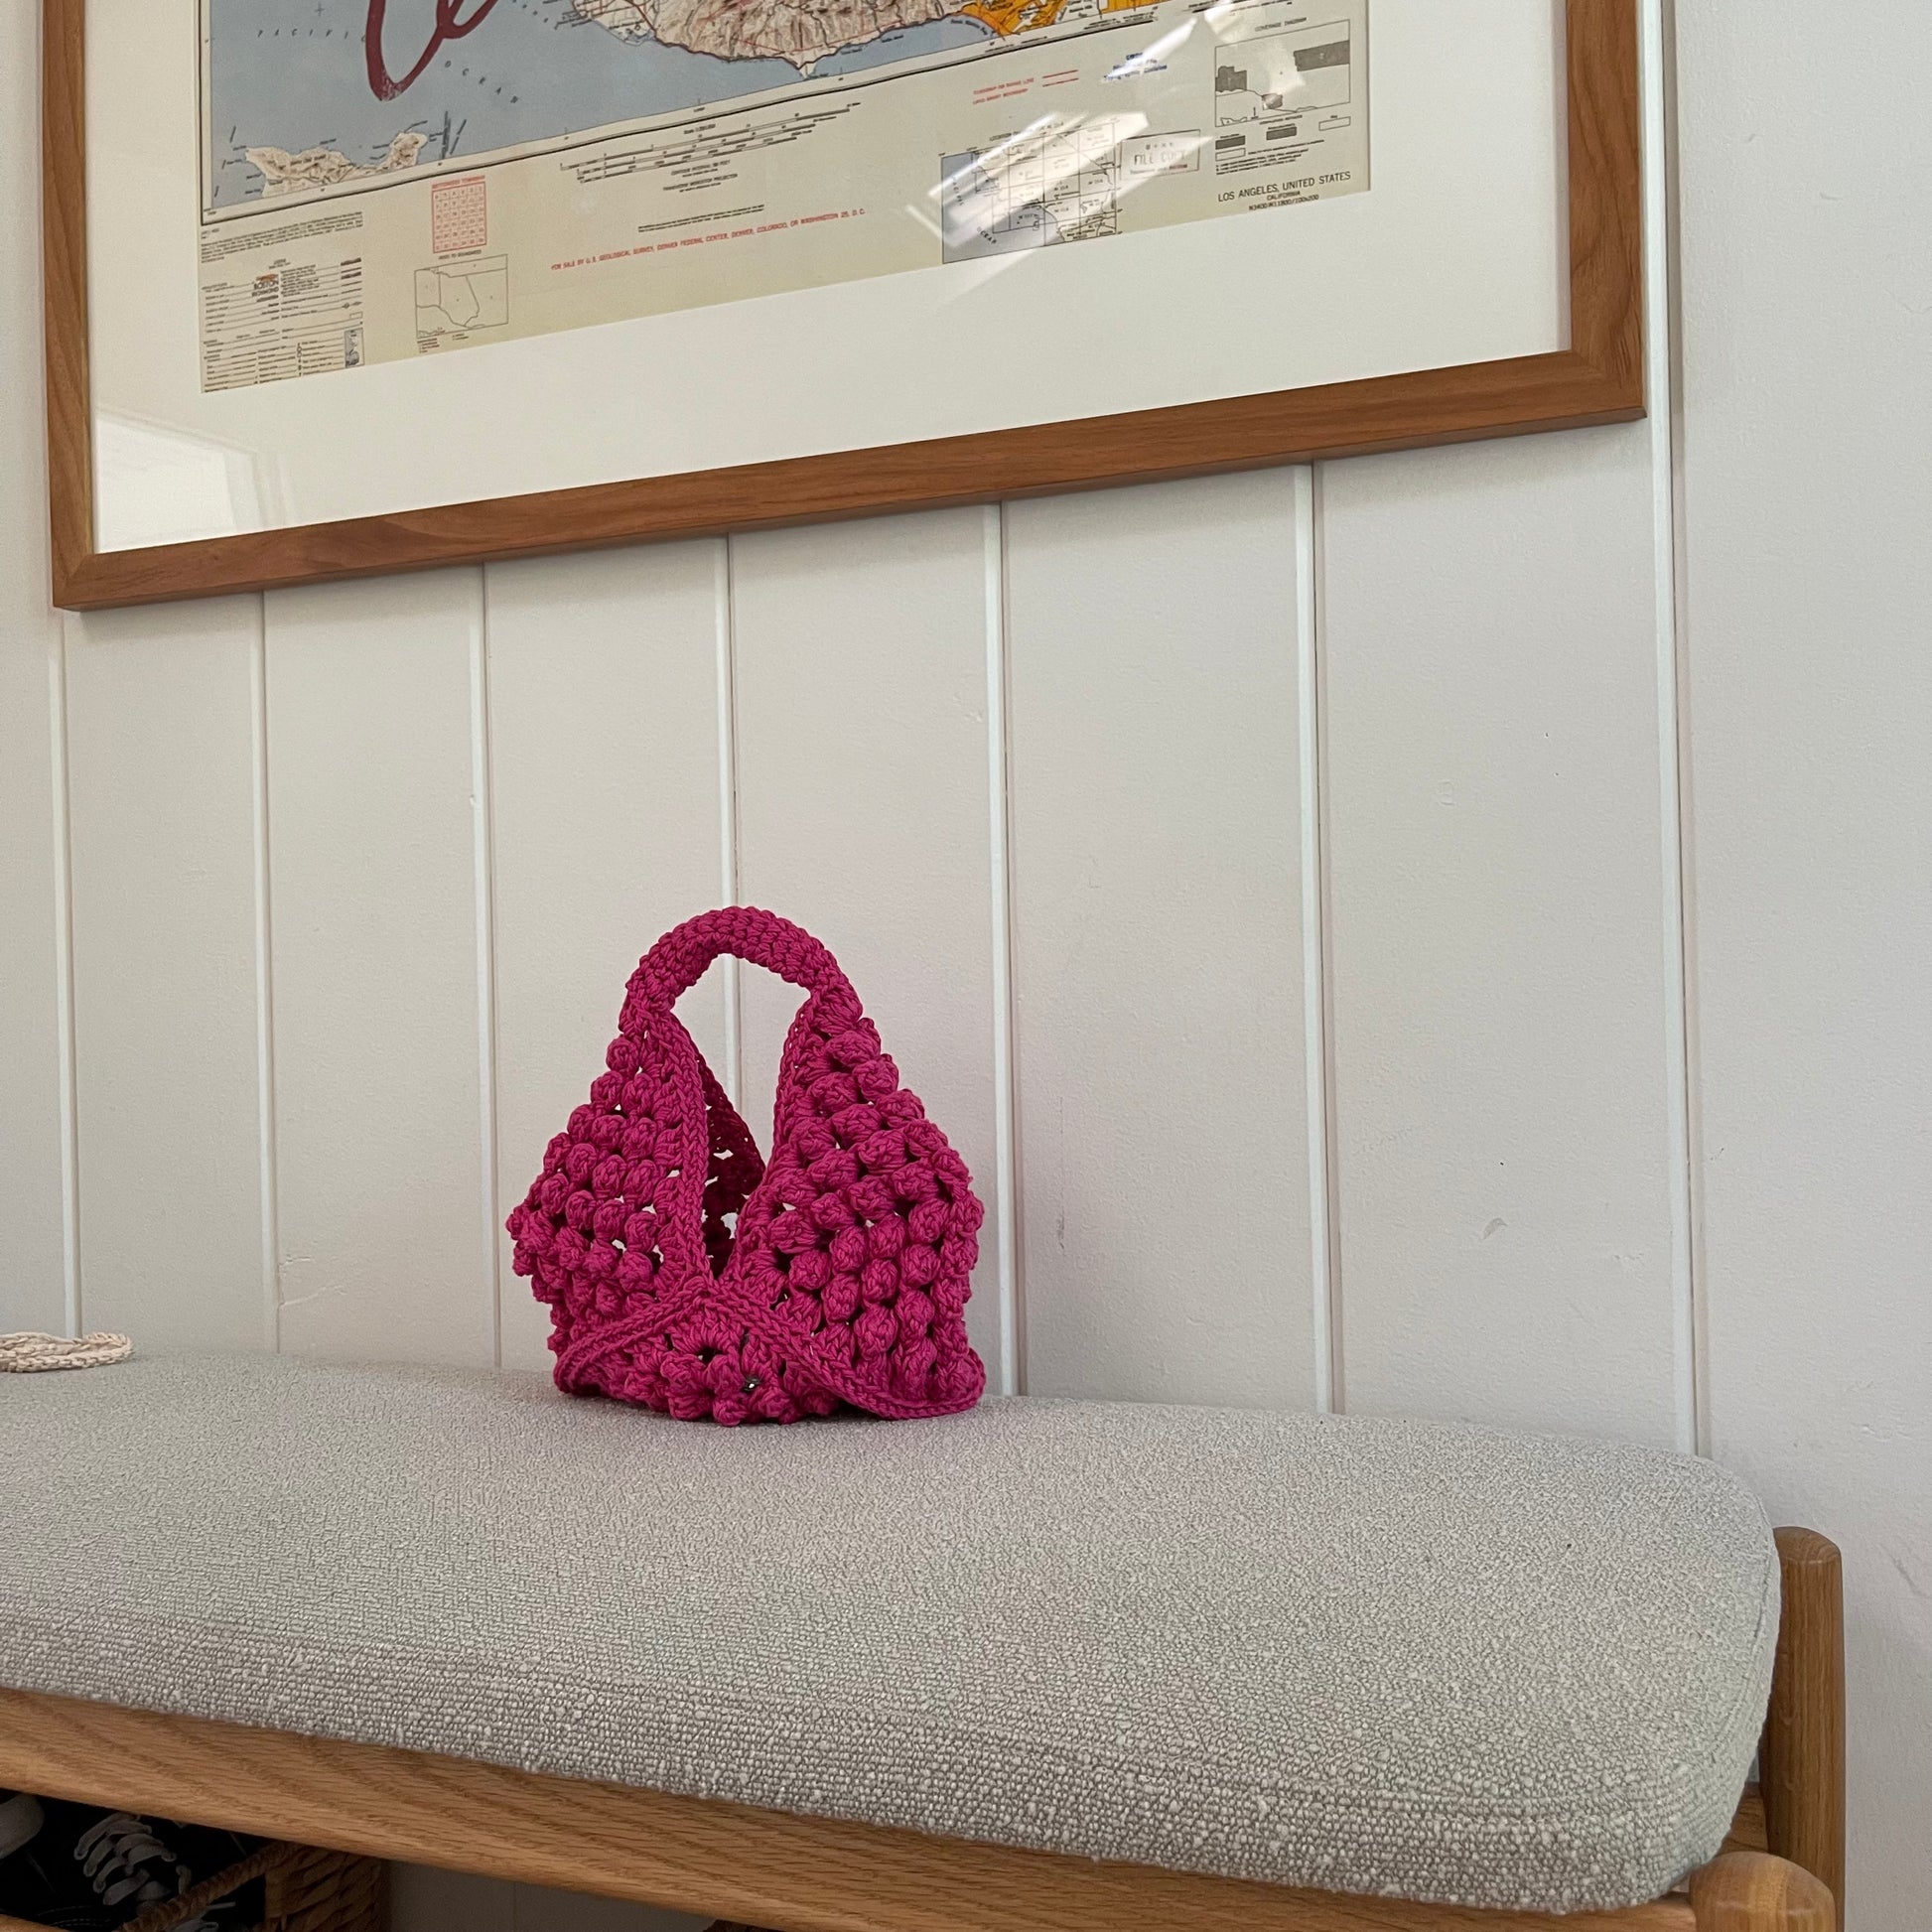 A lifestyle picture of a pink crocheted granny square handbag. 